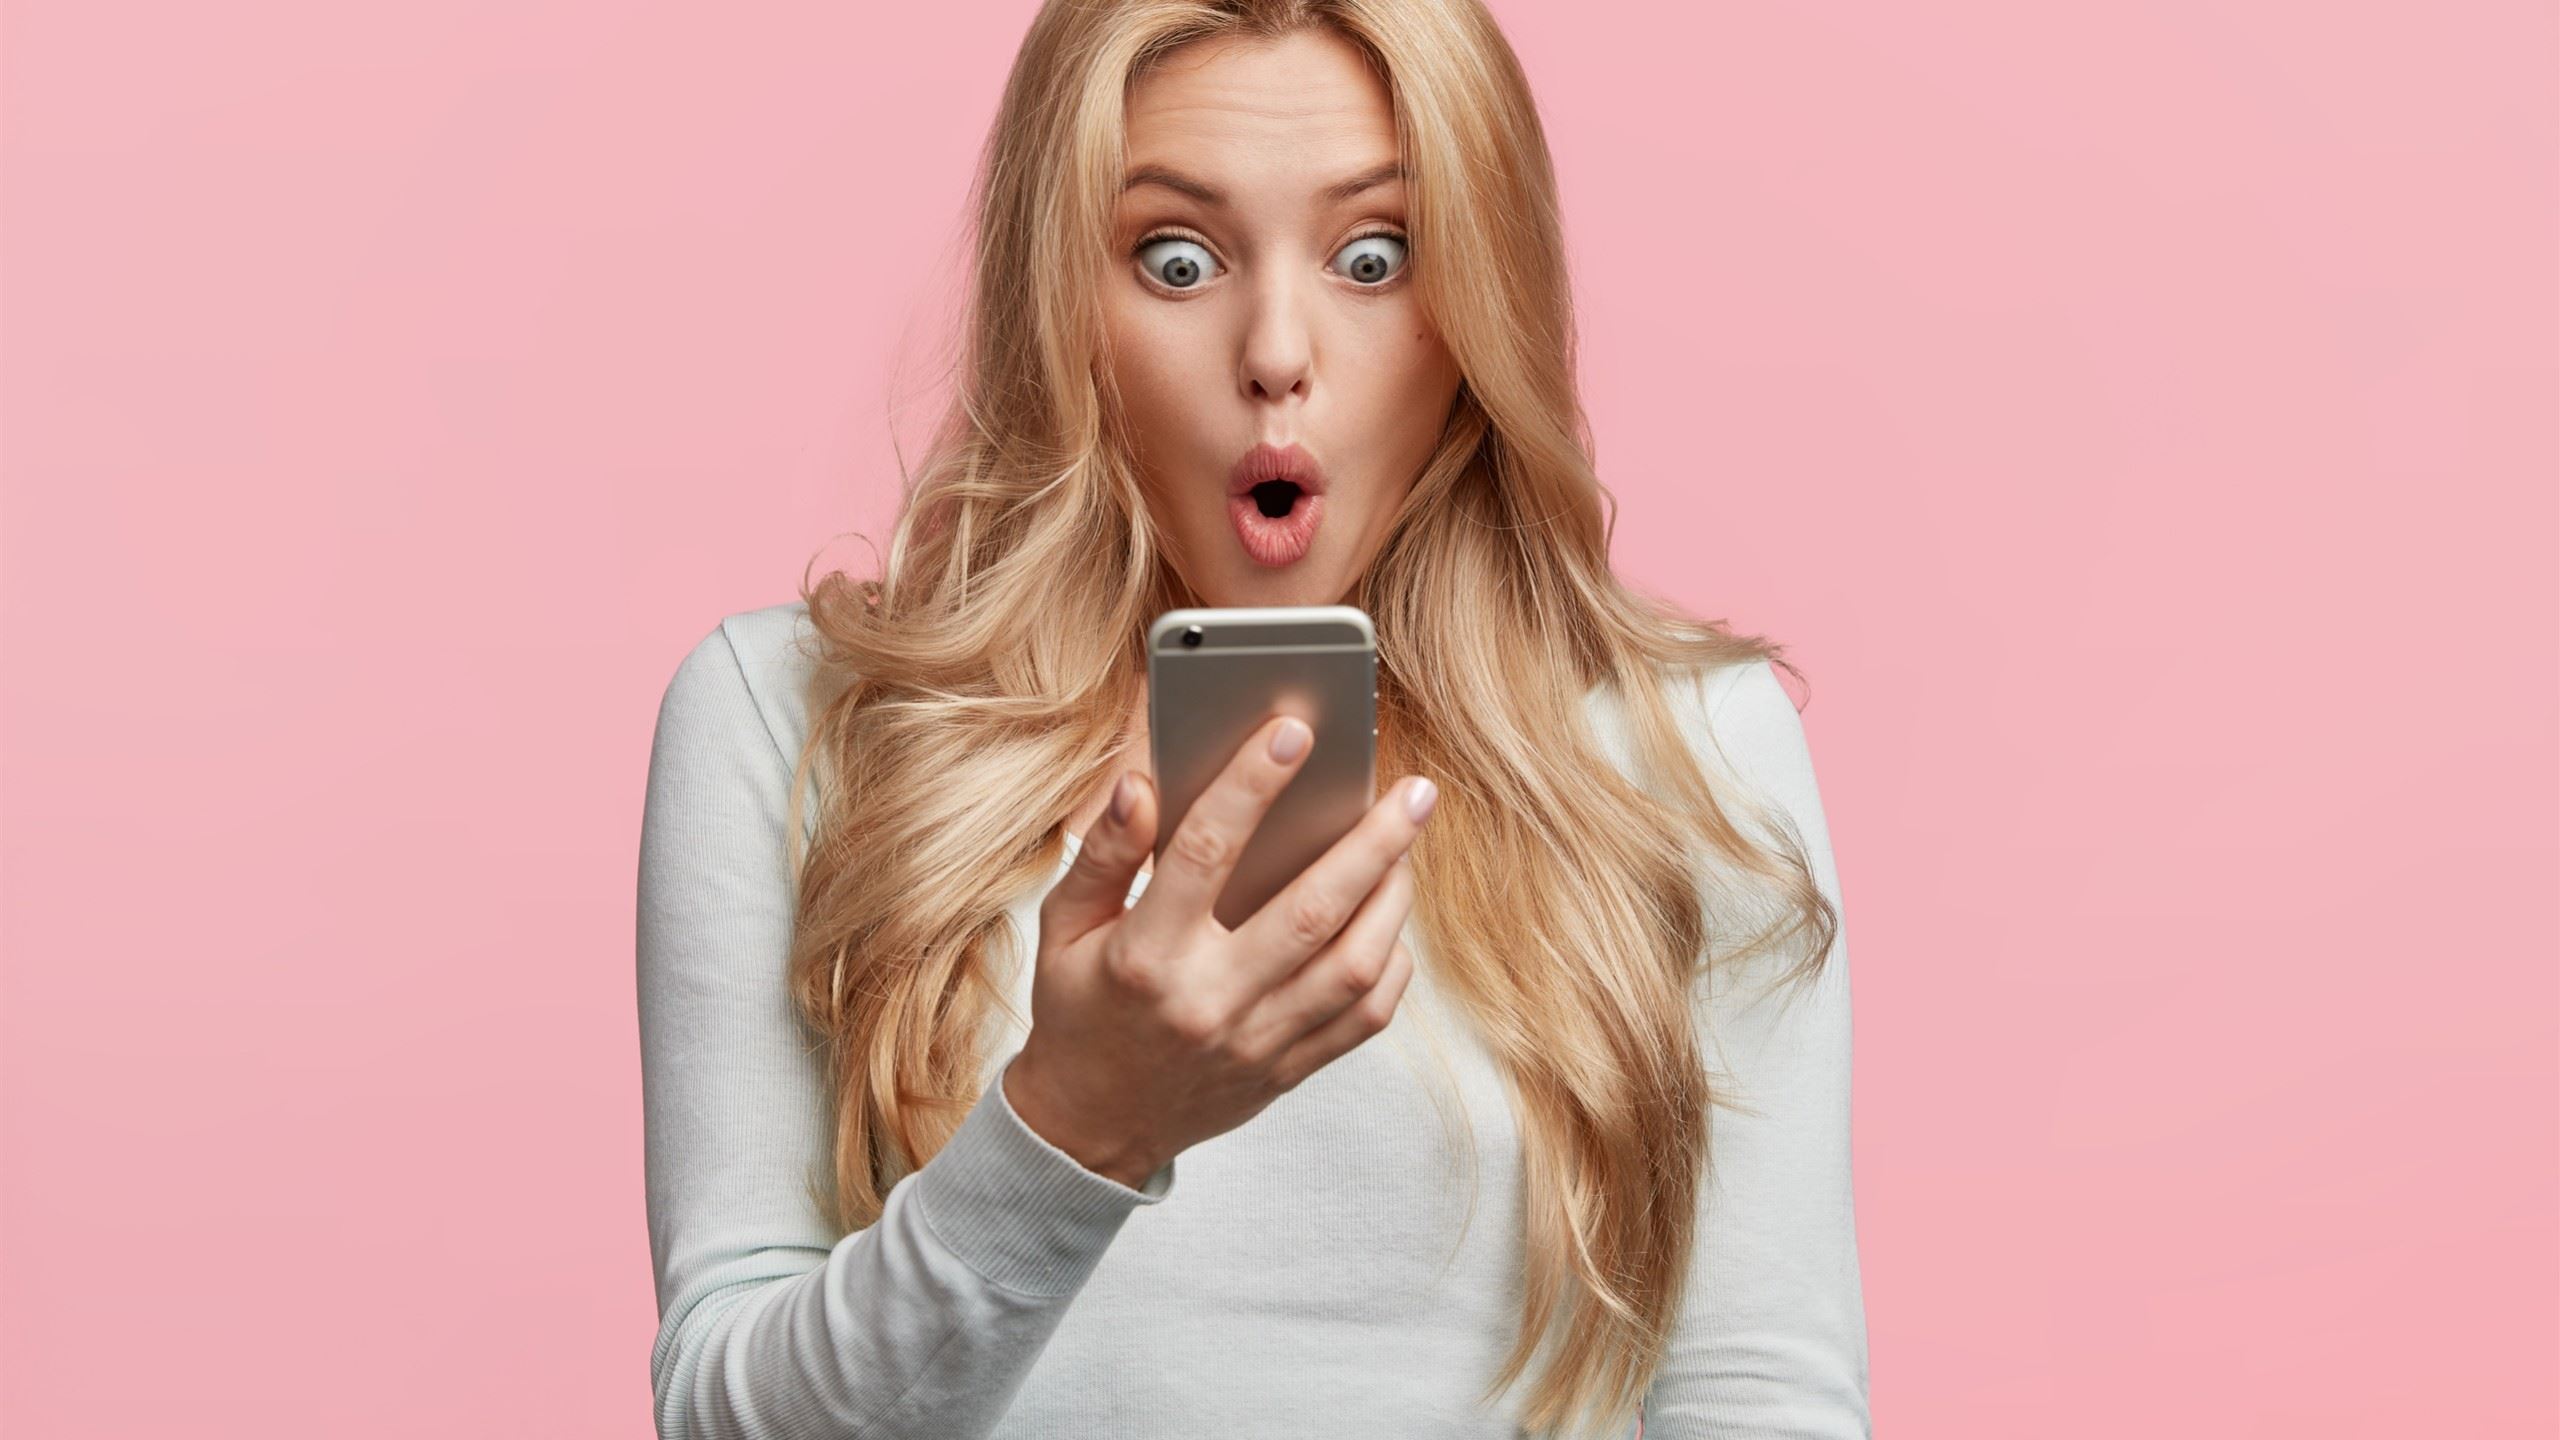 A bold, attractive girl looking very surprised at her mobile phone.